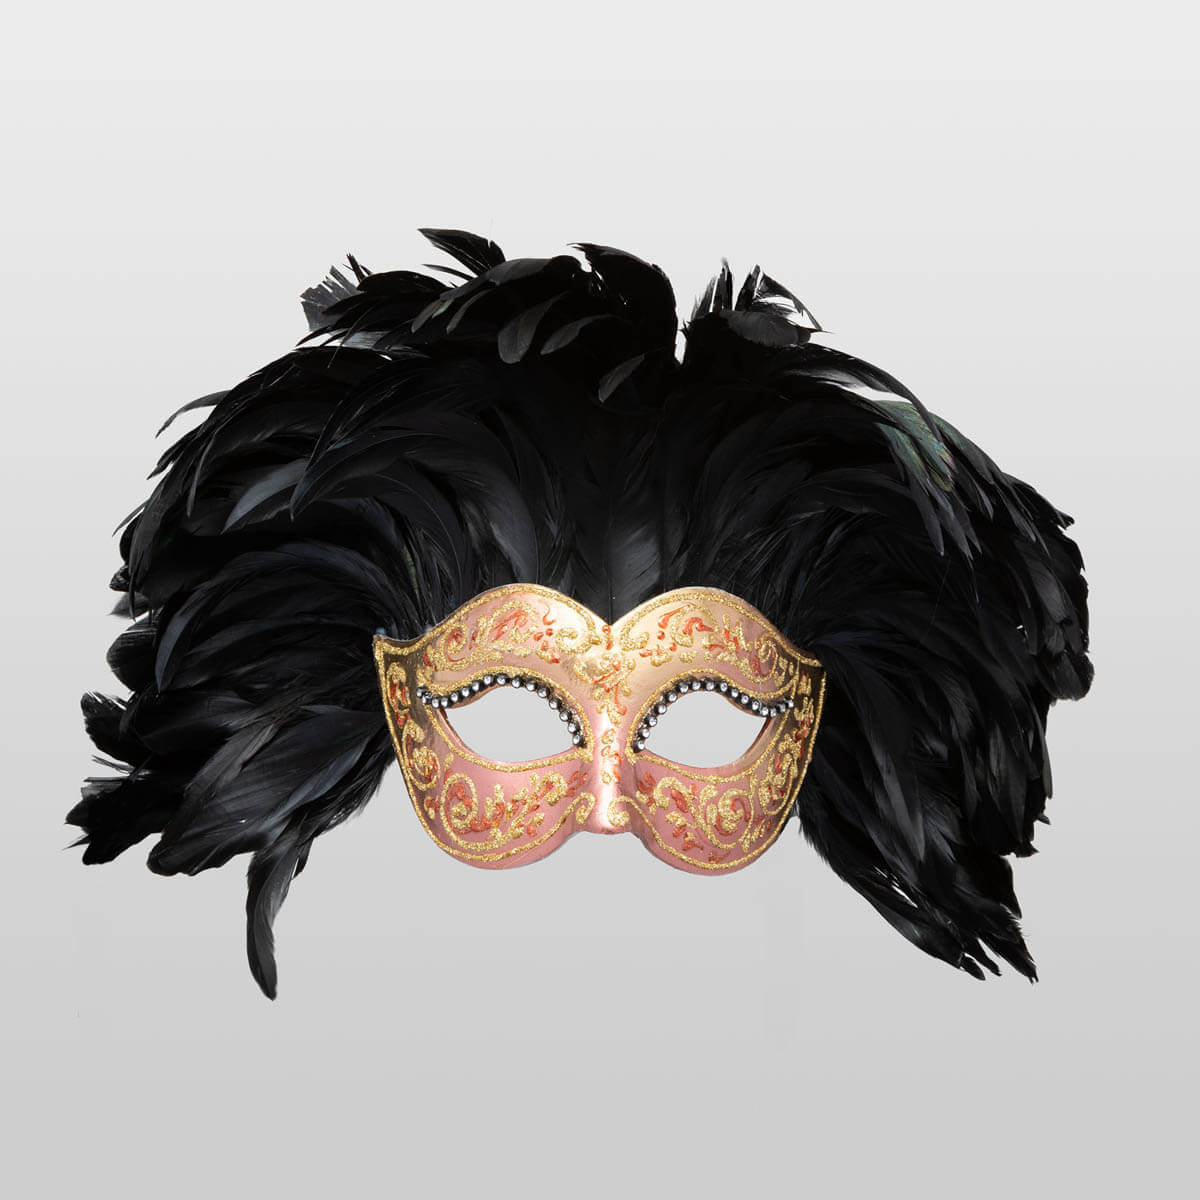 Colombina Fully Feathered Mask | Venetian Masks Made in Venice